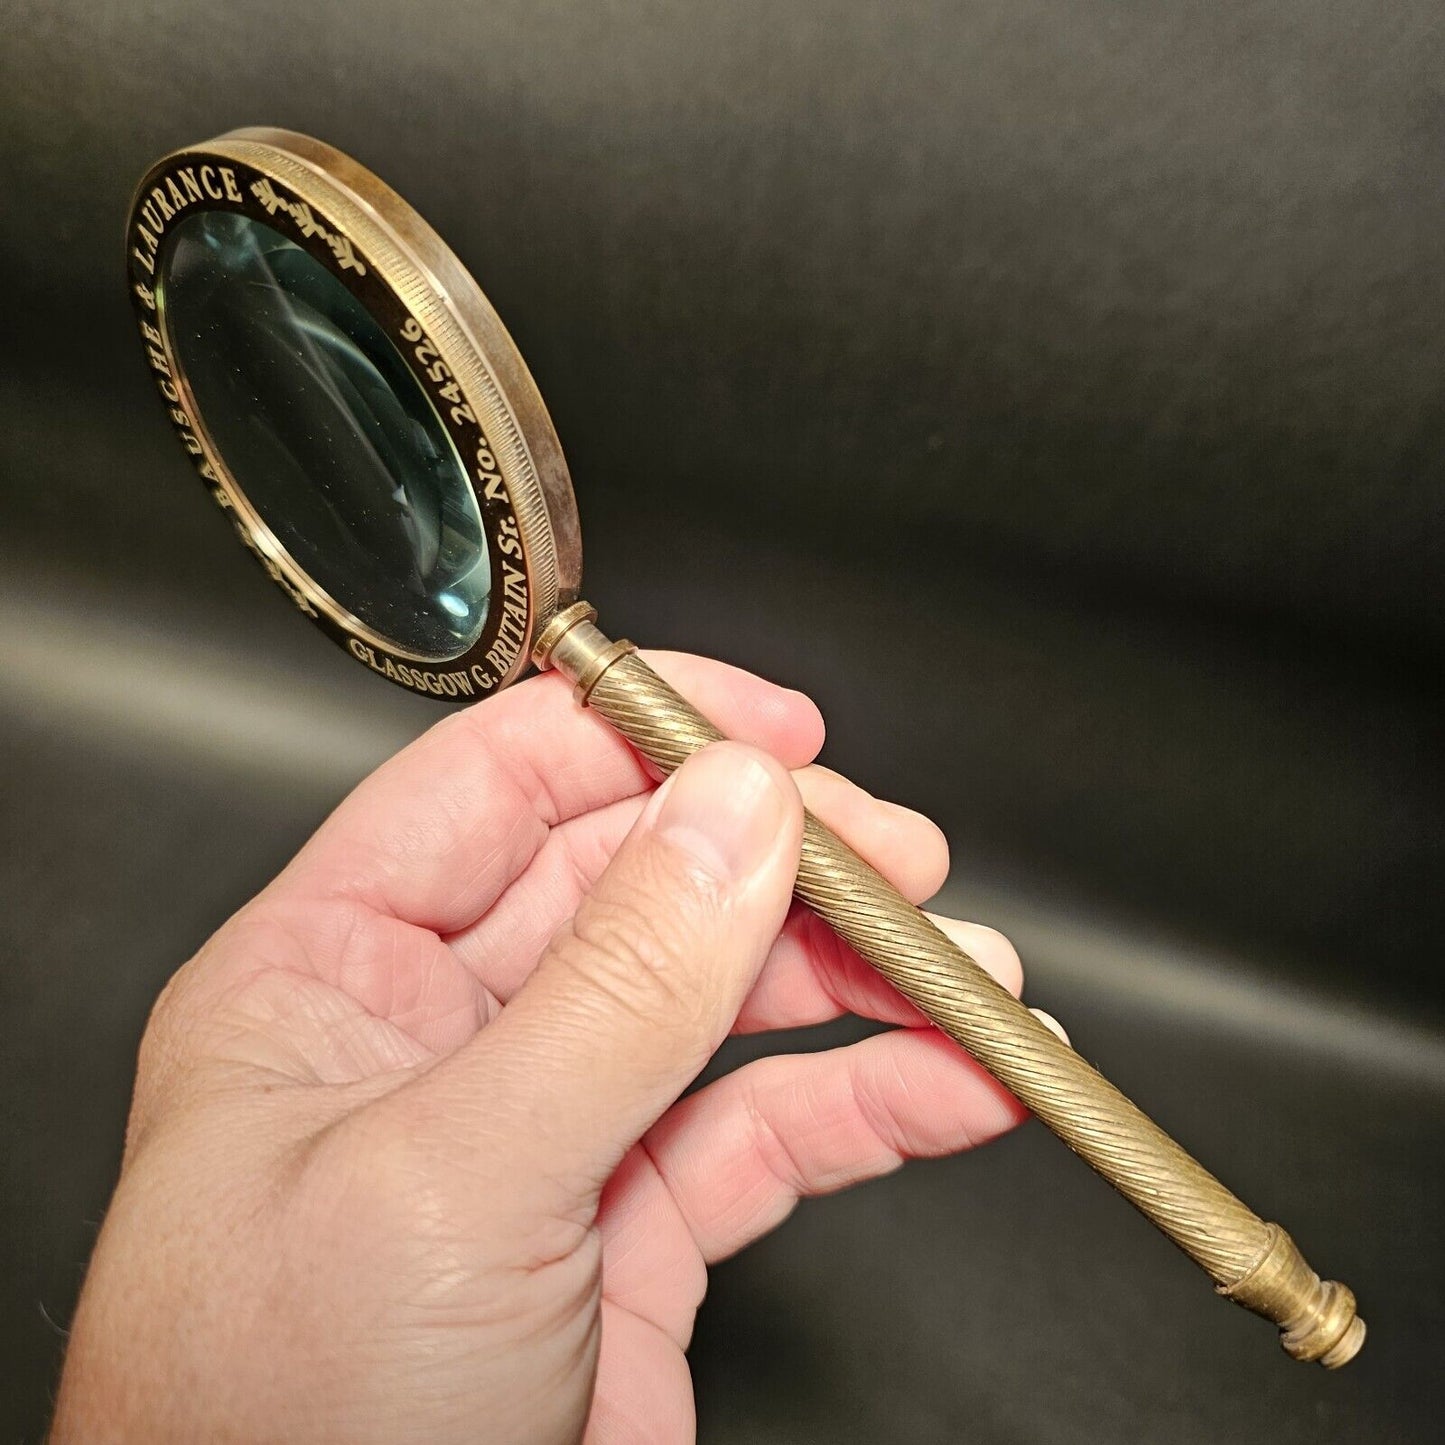 Antique Vintage Style, Brass Magnifying Glass "Bausche & Laurance"